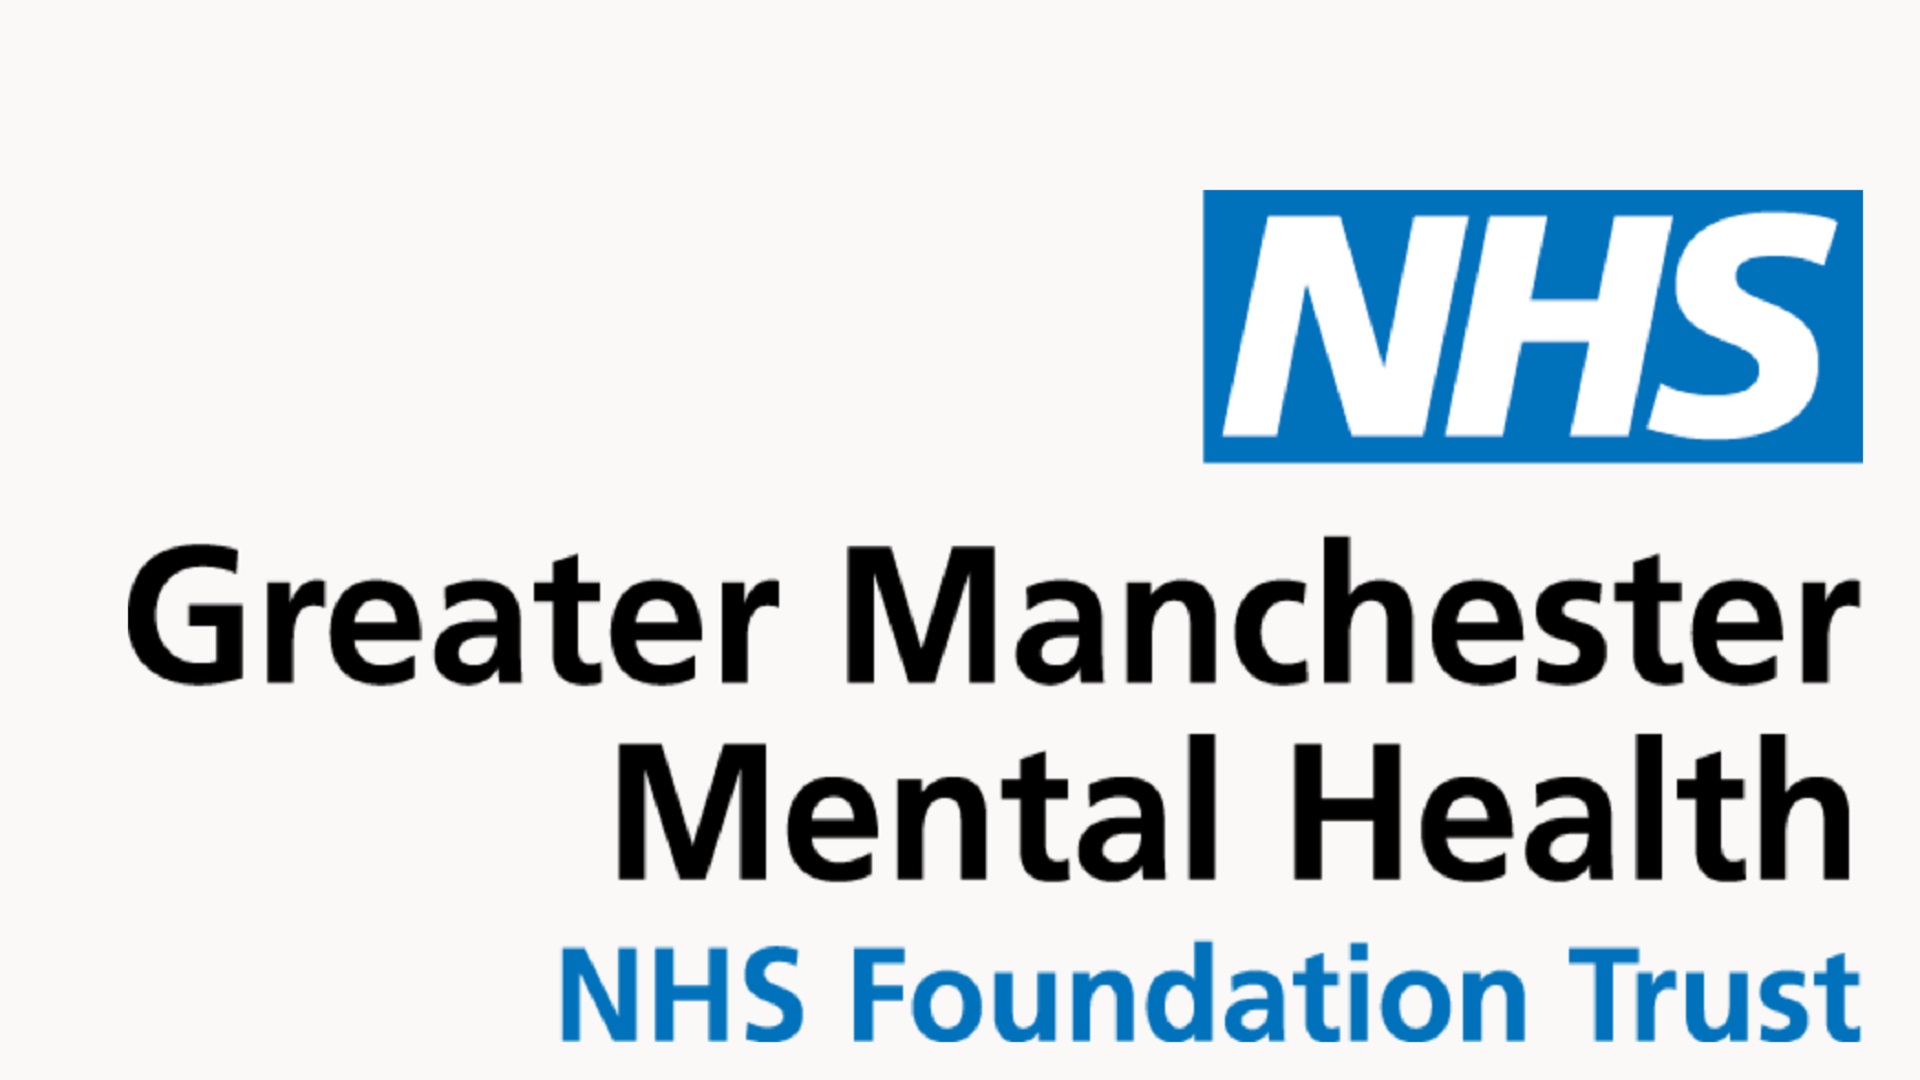 NHS Greater Manchester Mental Health